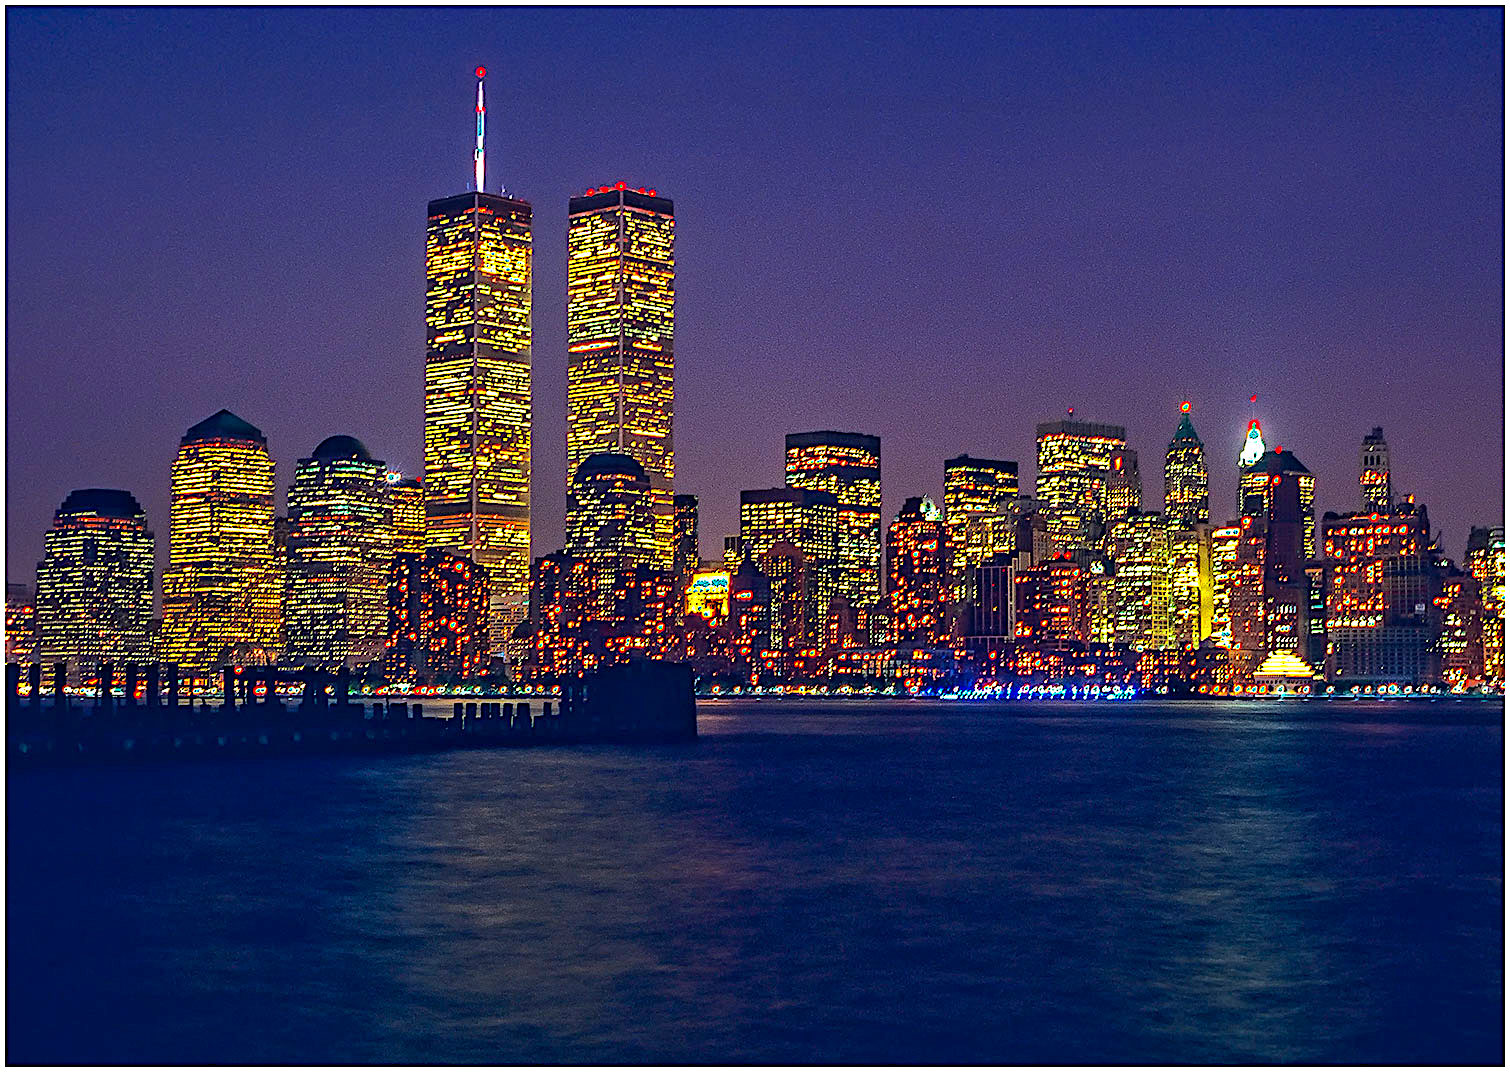 New York Skyline with Twin Towers of World Trade Center